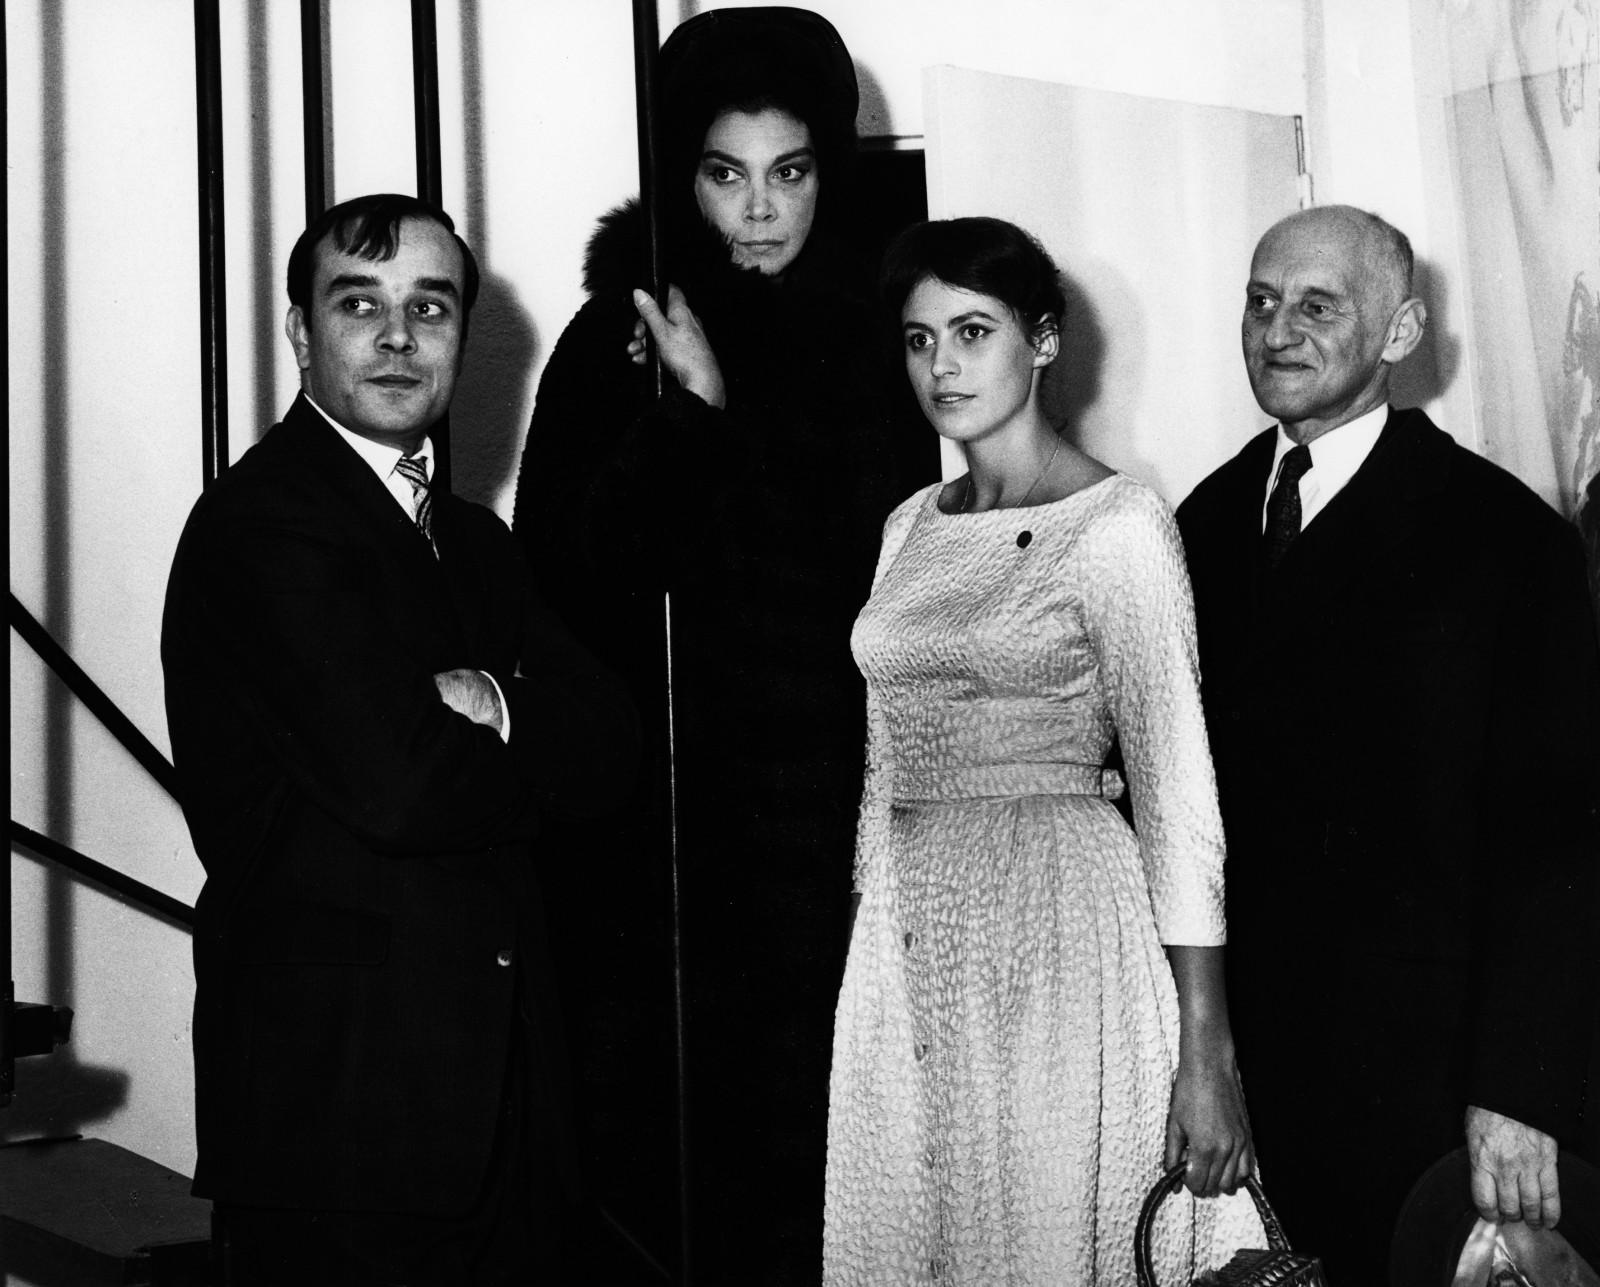 Yves Klein, Léonor Fini, Rotraut and Victor Brauner at the opening of the "Yves Klein le Monochrome" exhibition at the Galerie Rive Droite